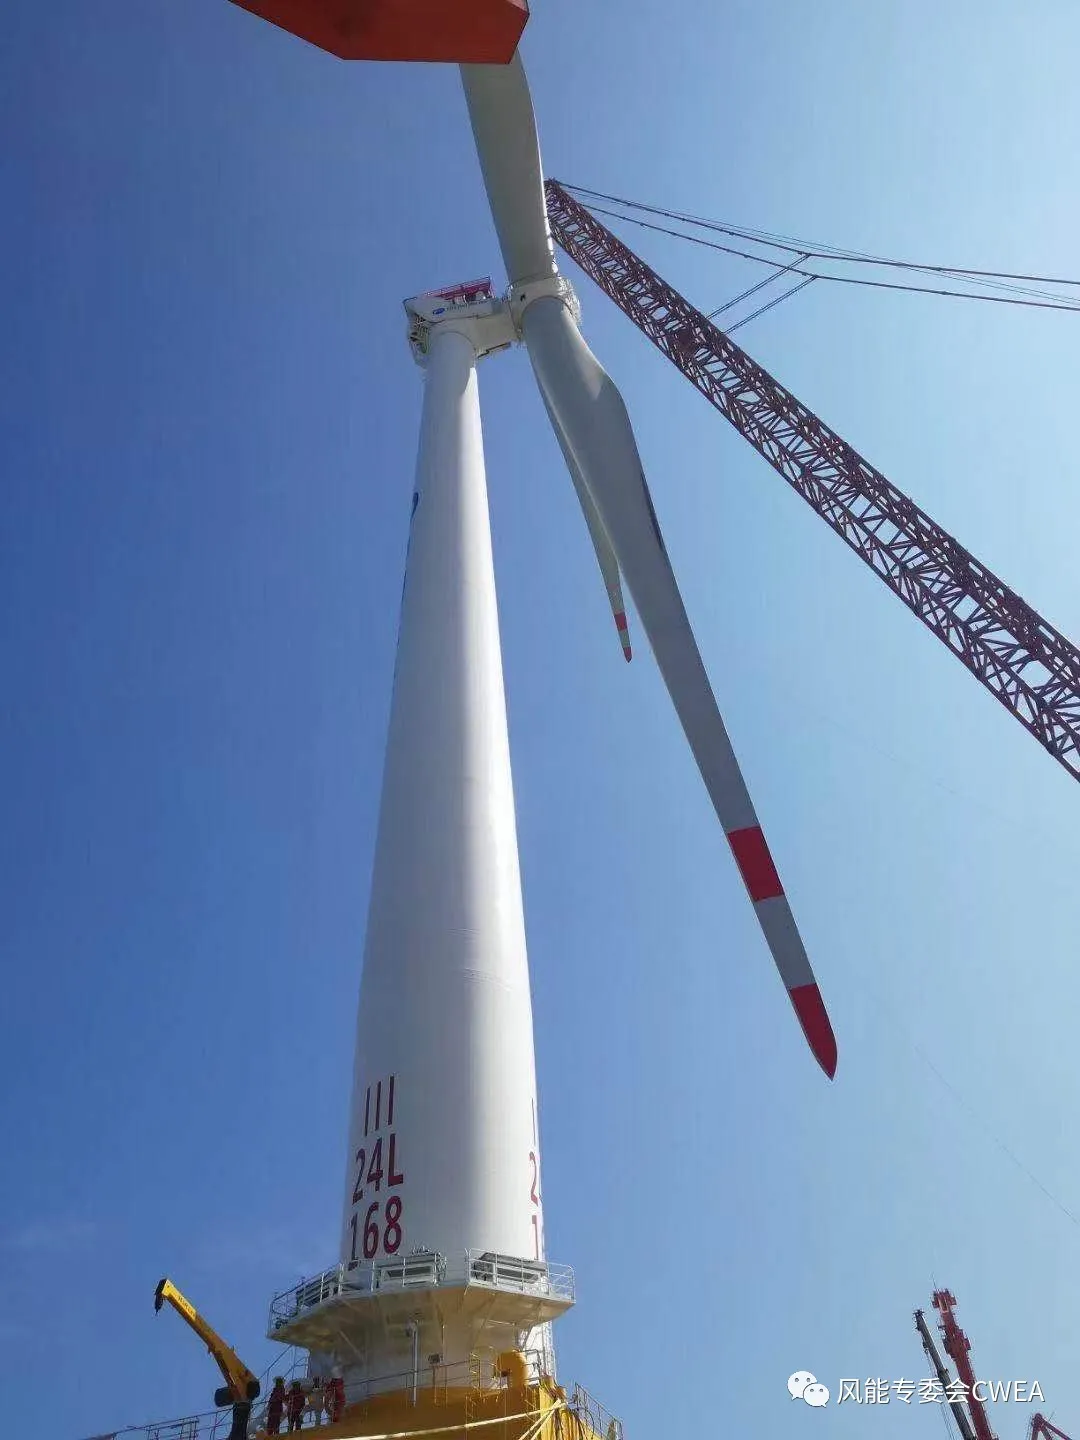 Super burning! The world's first anti-typhoon floating offshore wind turbine  settled in Yangjiang, Guangdong - Weite Technologies Co., Ltd.